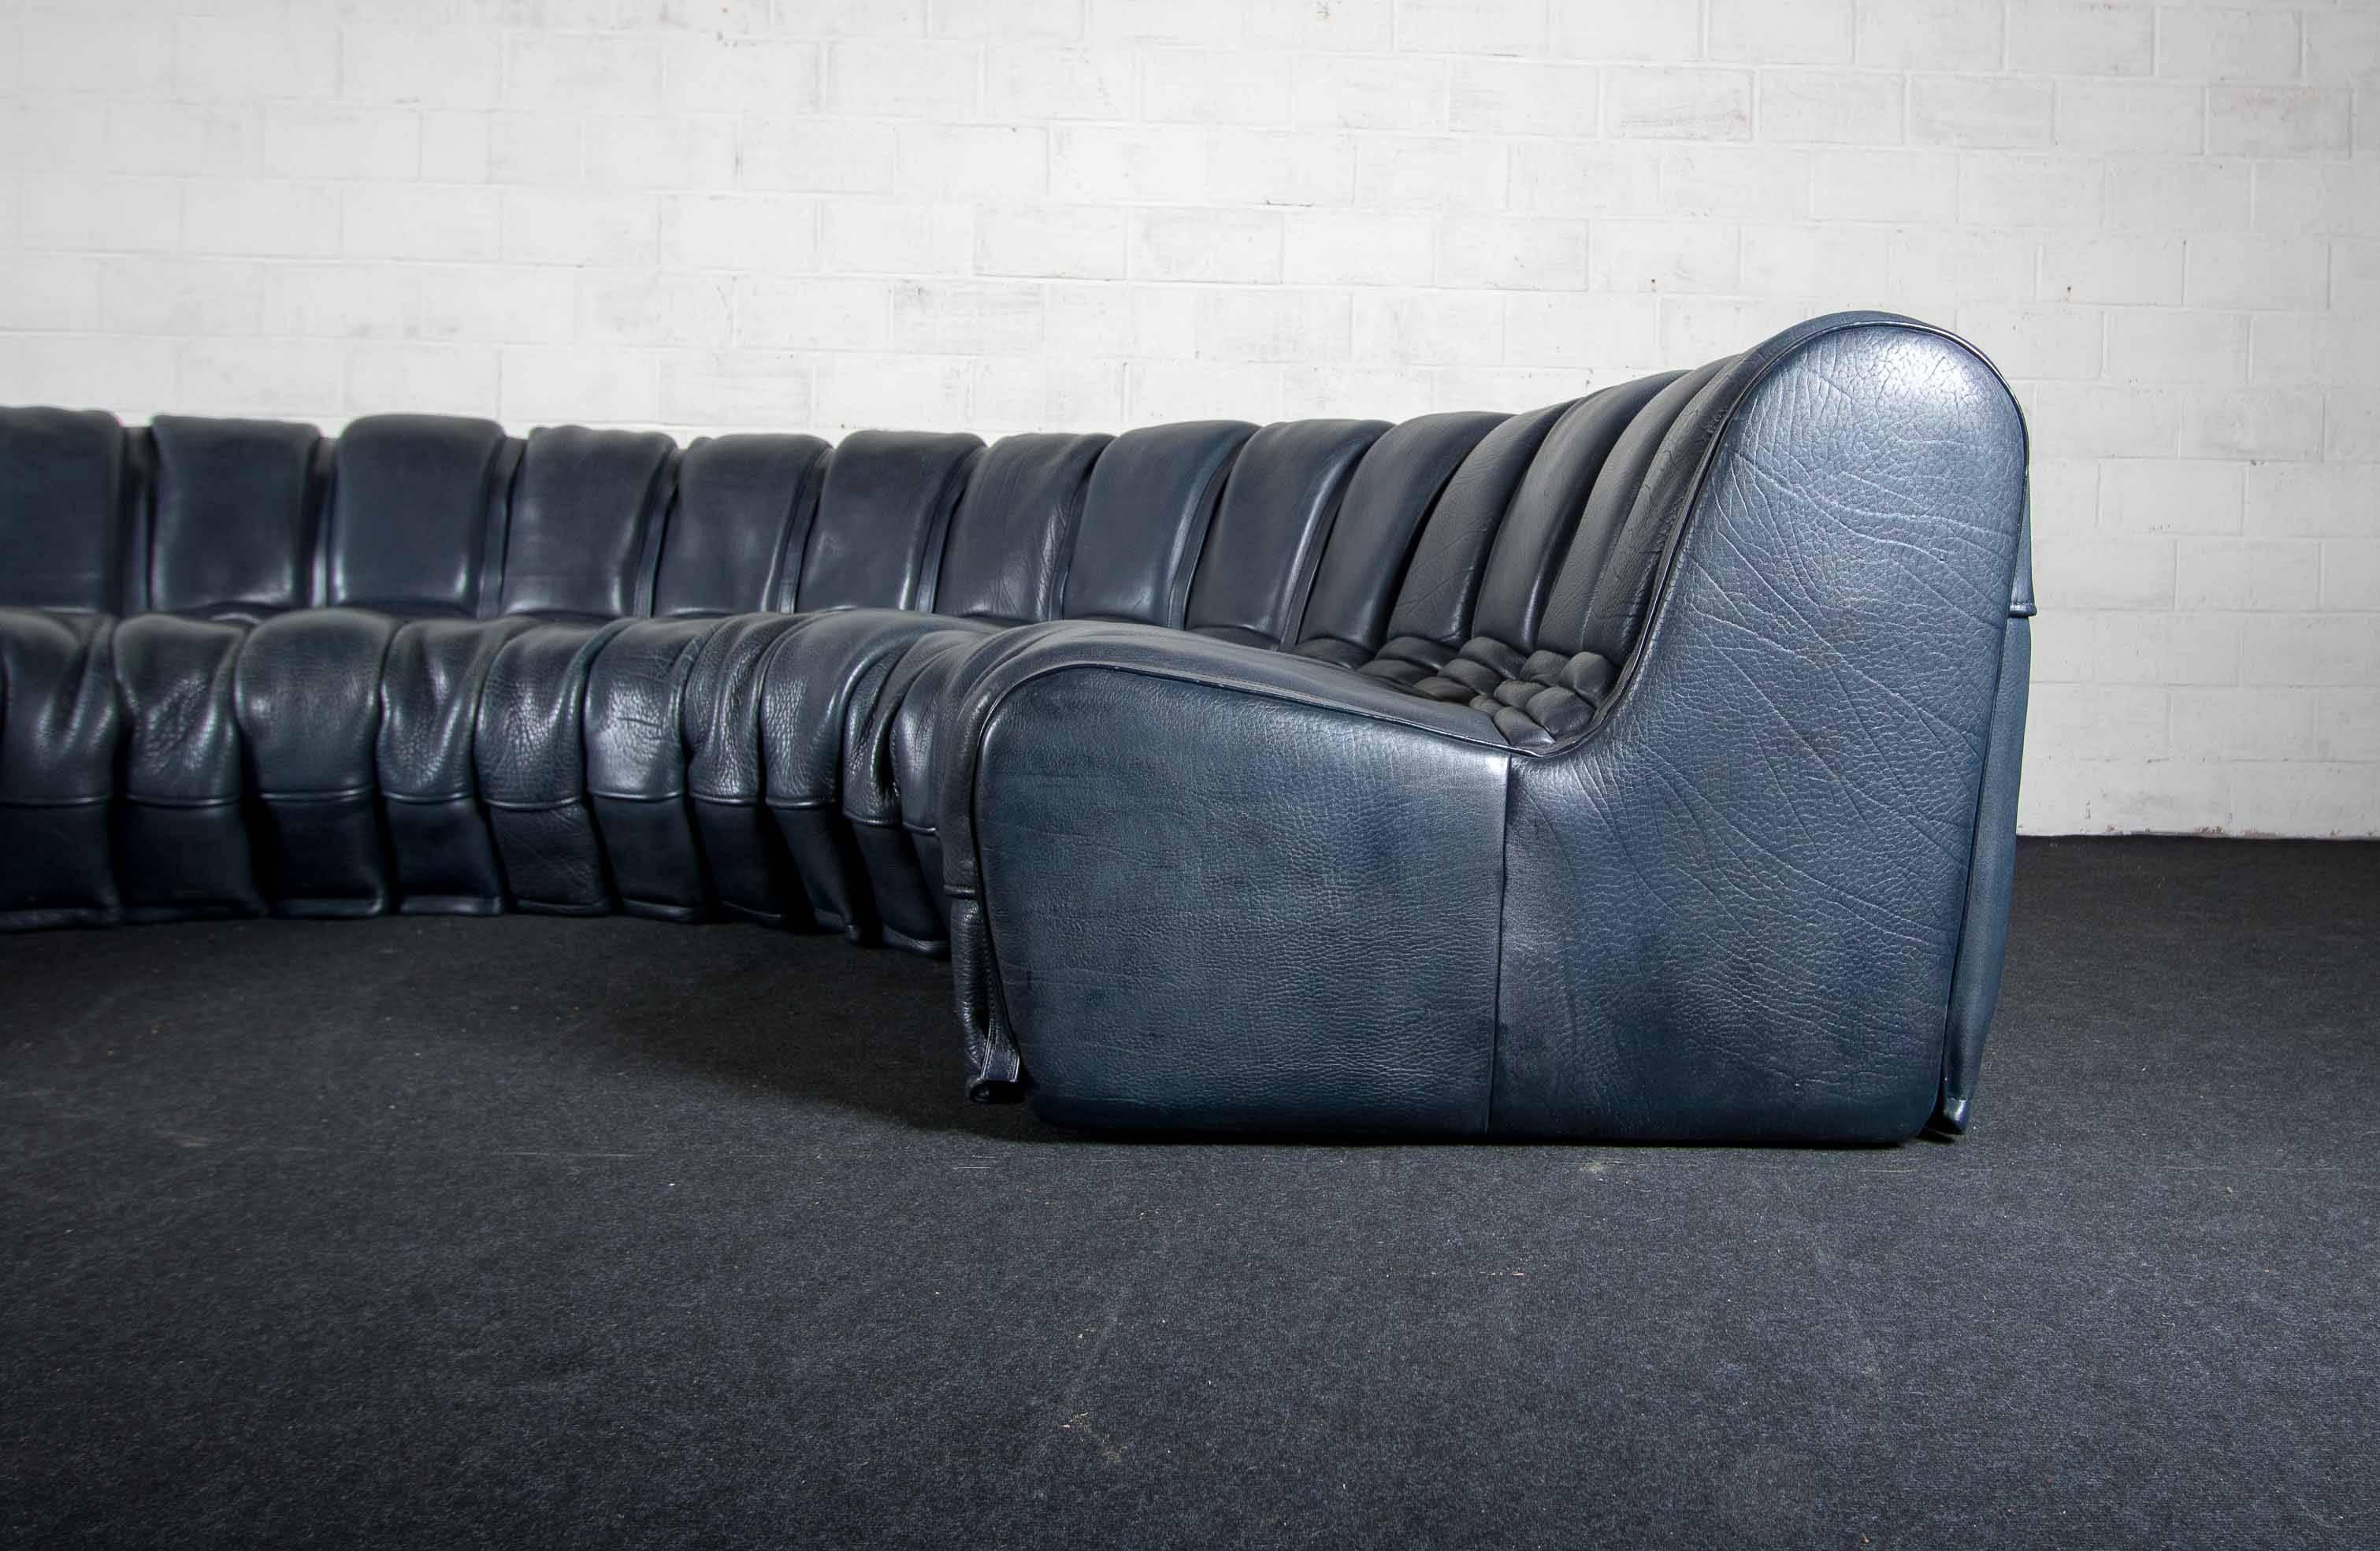 Exclusive and rare sofa made by the Swiss brand De Sede.
This model DS600 is designed by Ernst Lüthy and has 20 separate parts that are connected to each other.
Other then the original DS600 from De Sede these rare edition is fully coverd in thick